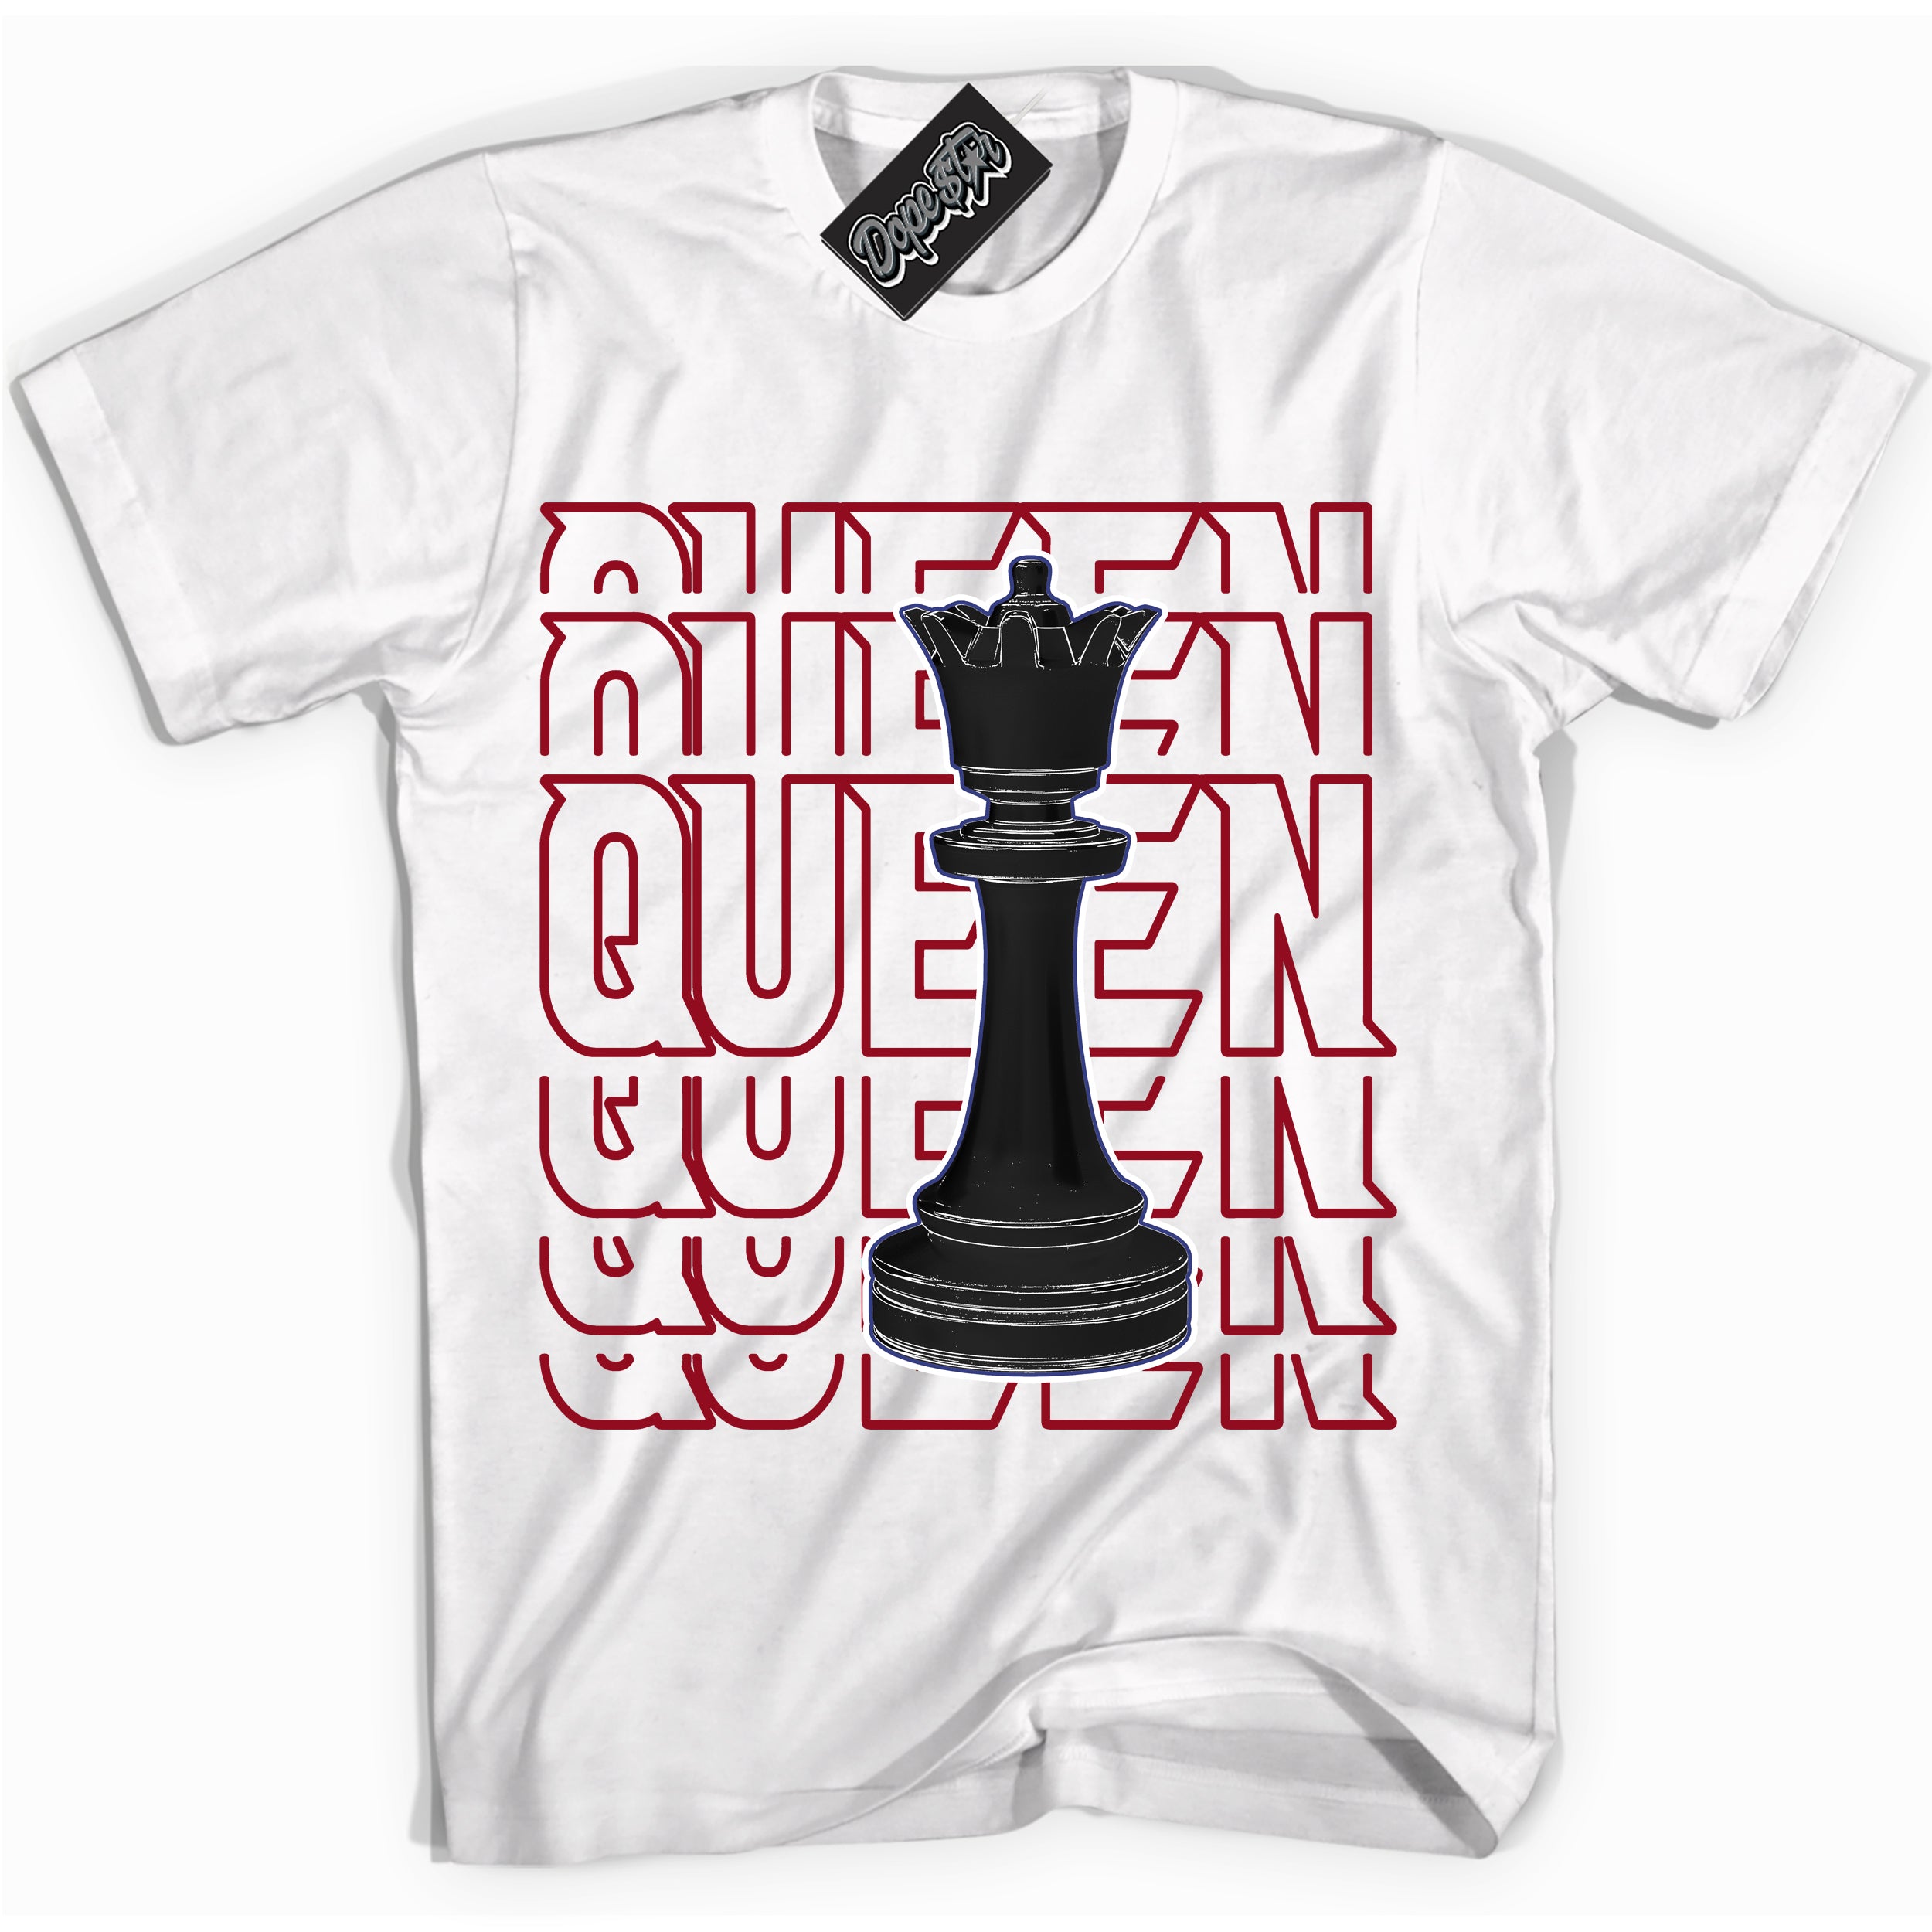 Cool White Shirt with “ Queen Chess ” design that perfectly matches Playoffs 8s Sneakers.